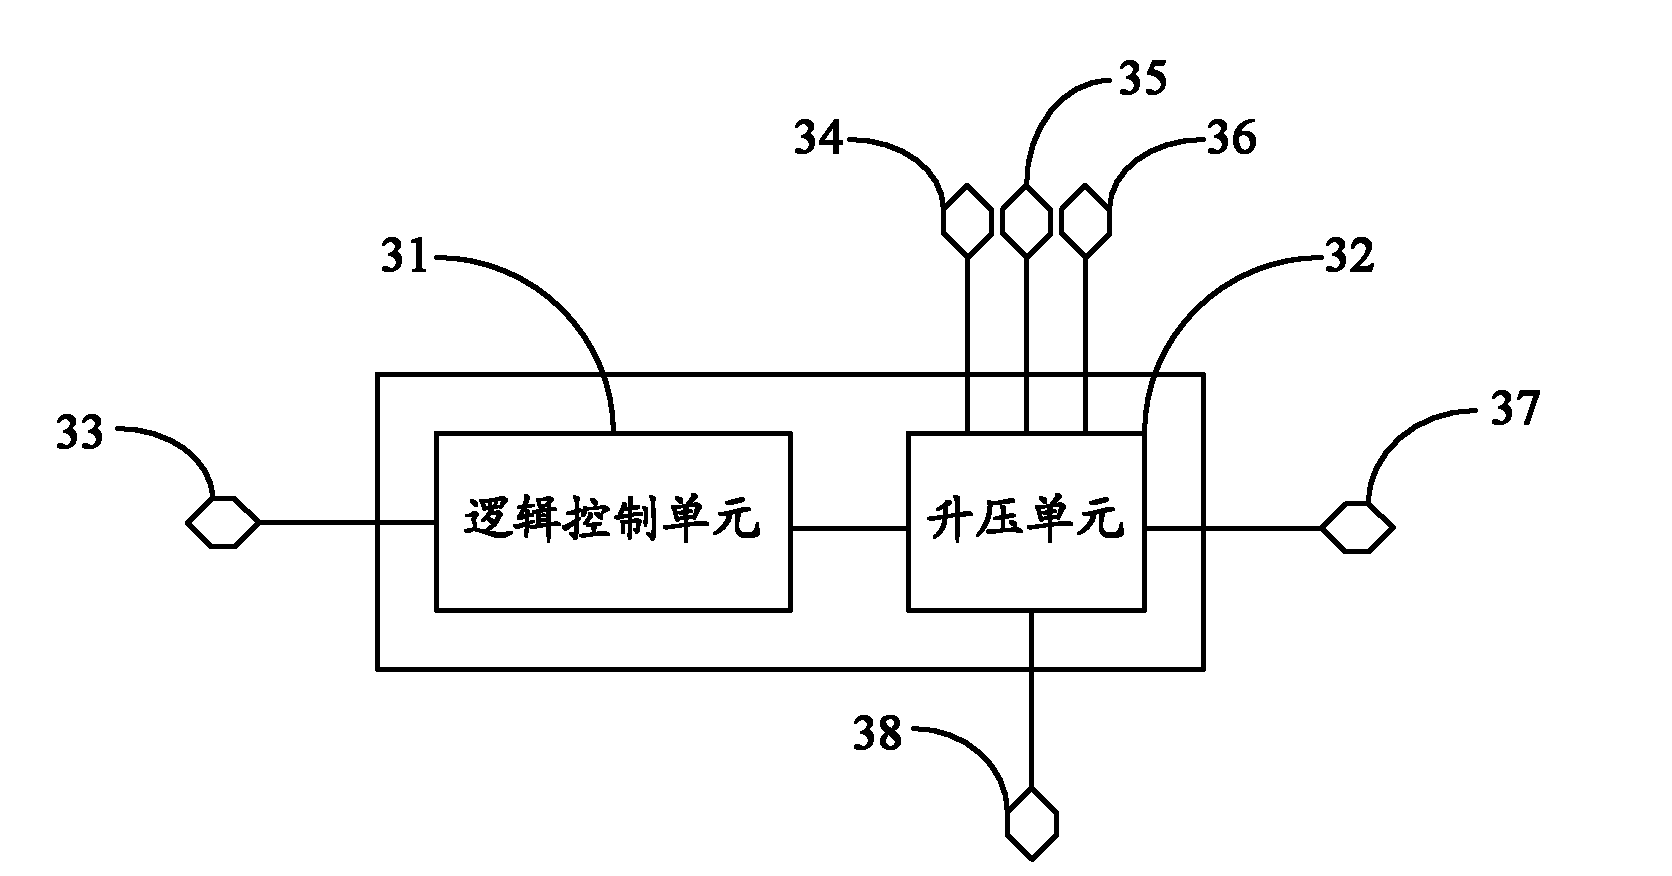 A cycle control wled drive chip and drive circuit